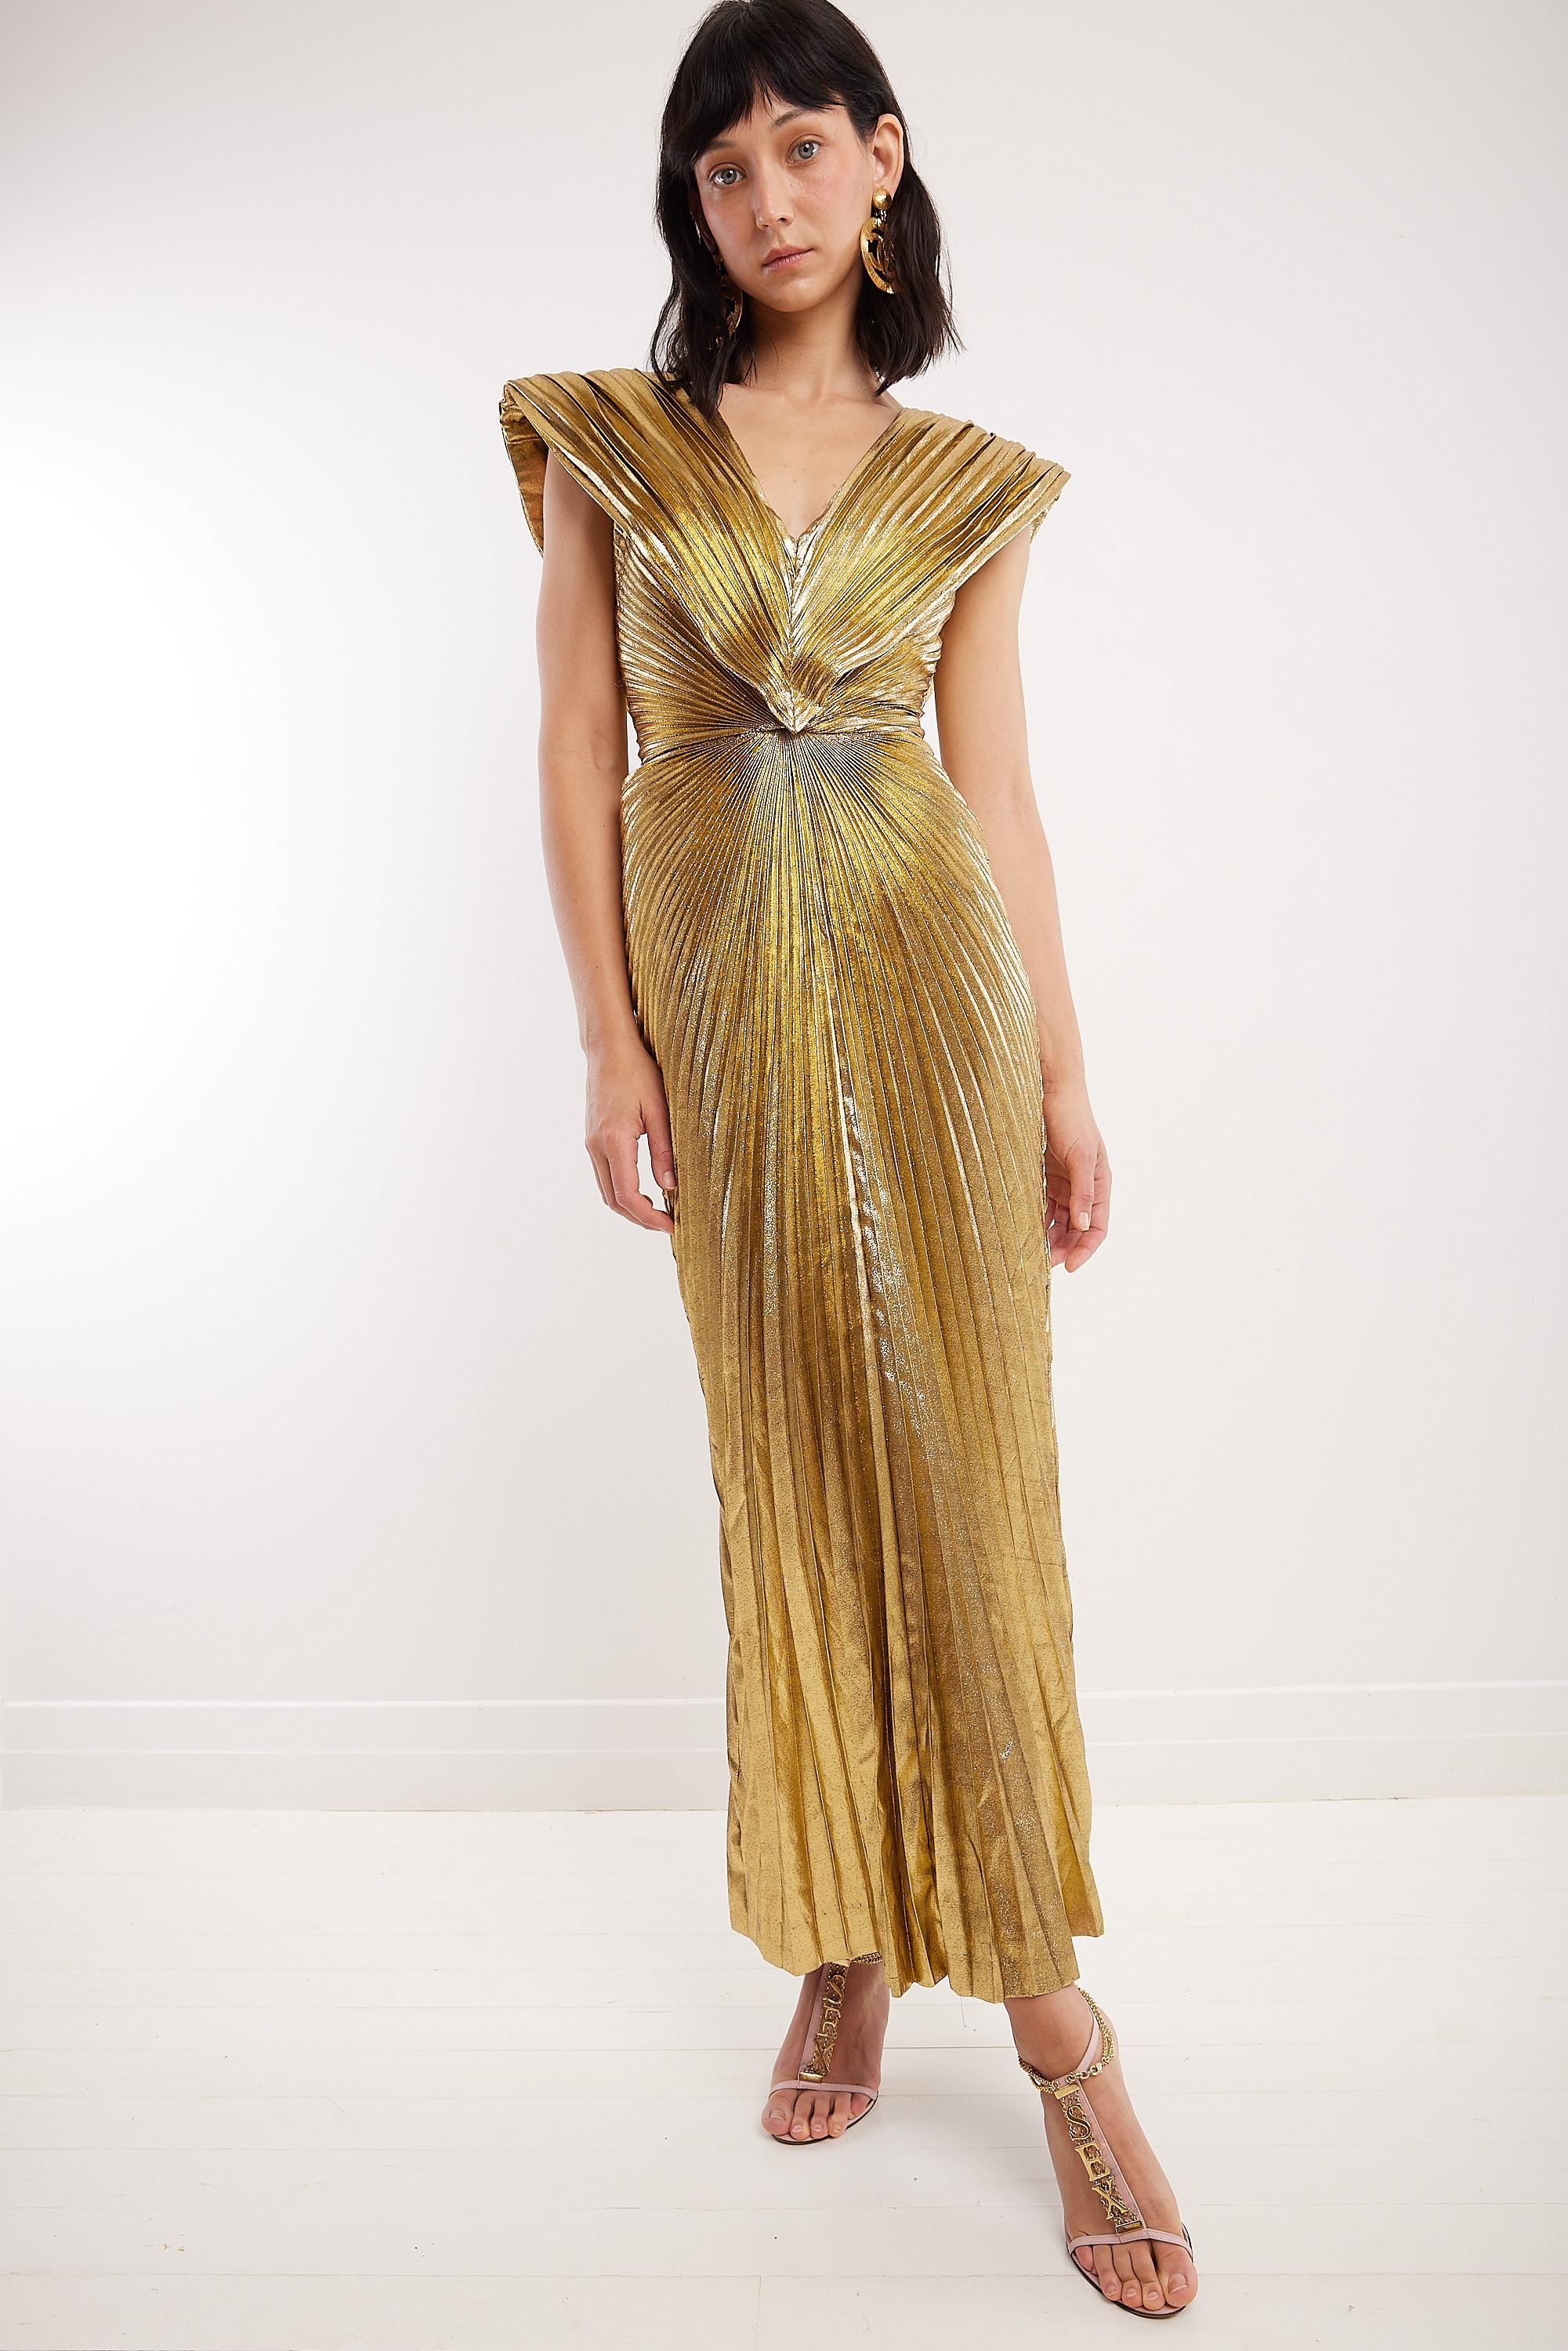 Azzaro Paris 80's Gold Lamé Sunray Pleated Met Gala Evening Gown For Sale 2